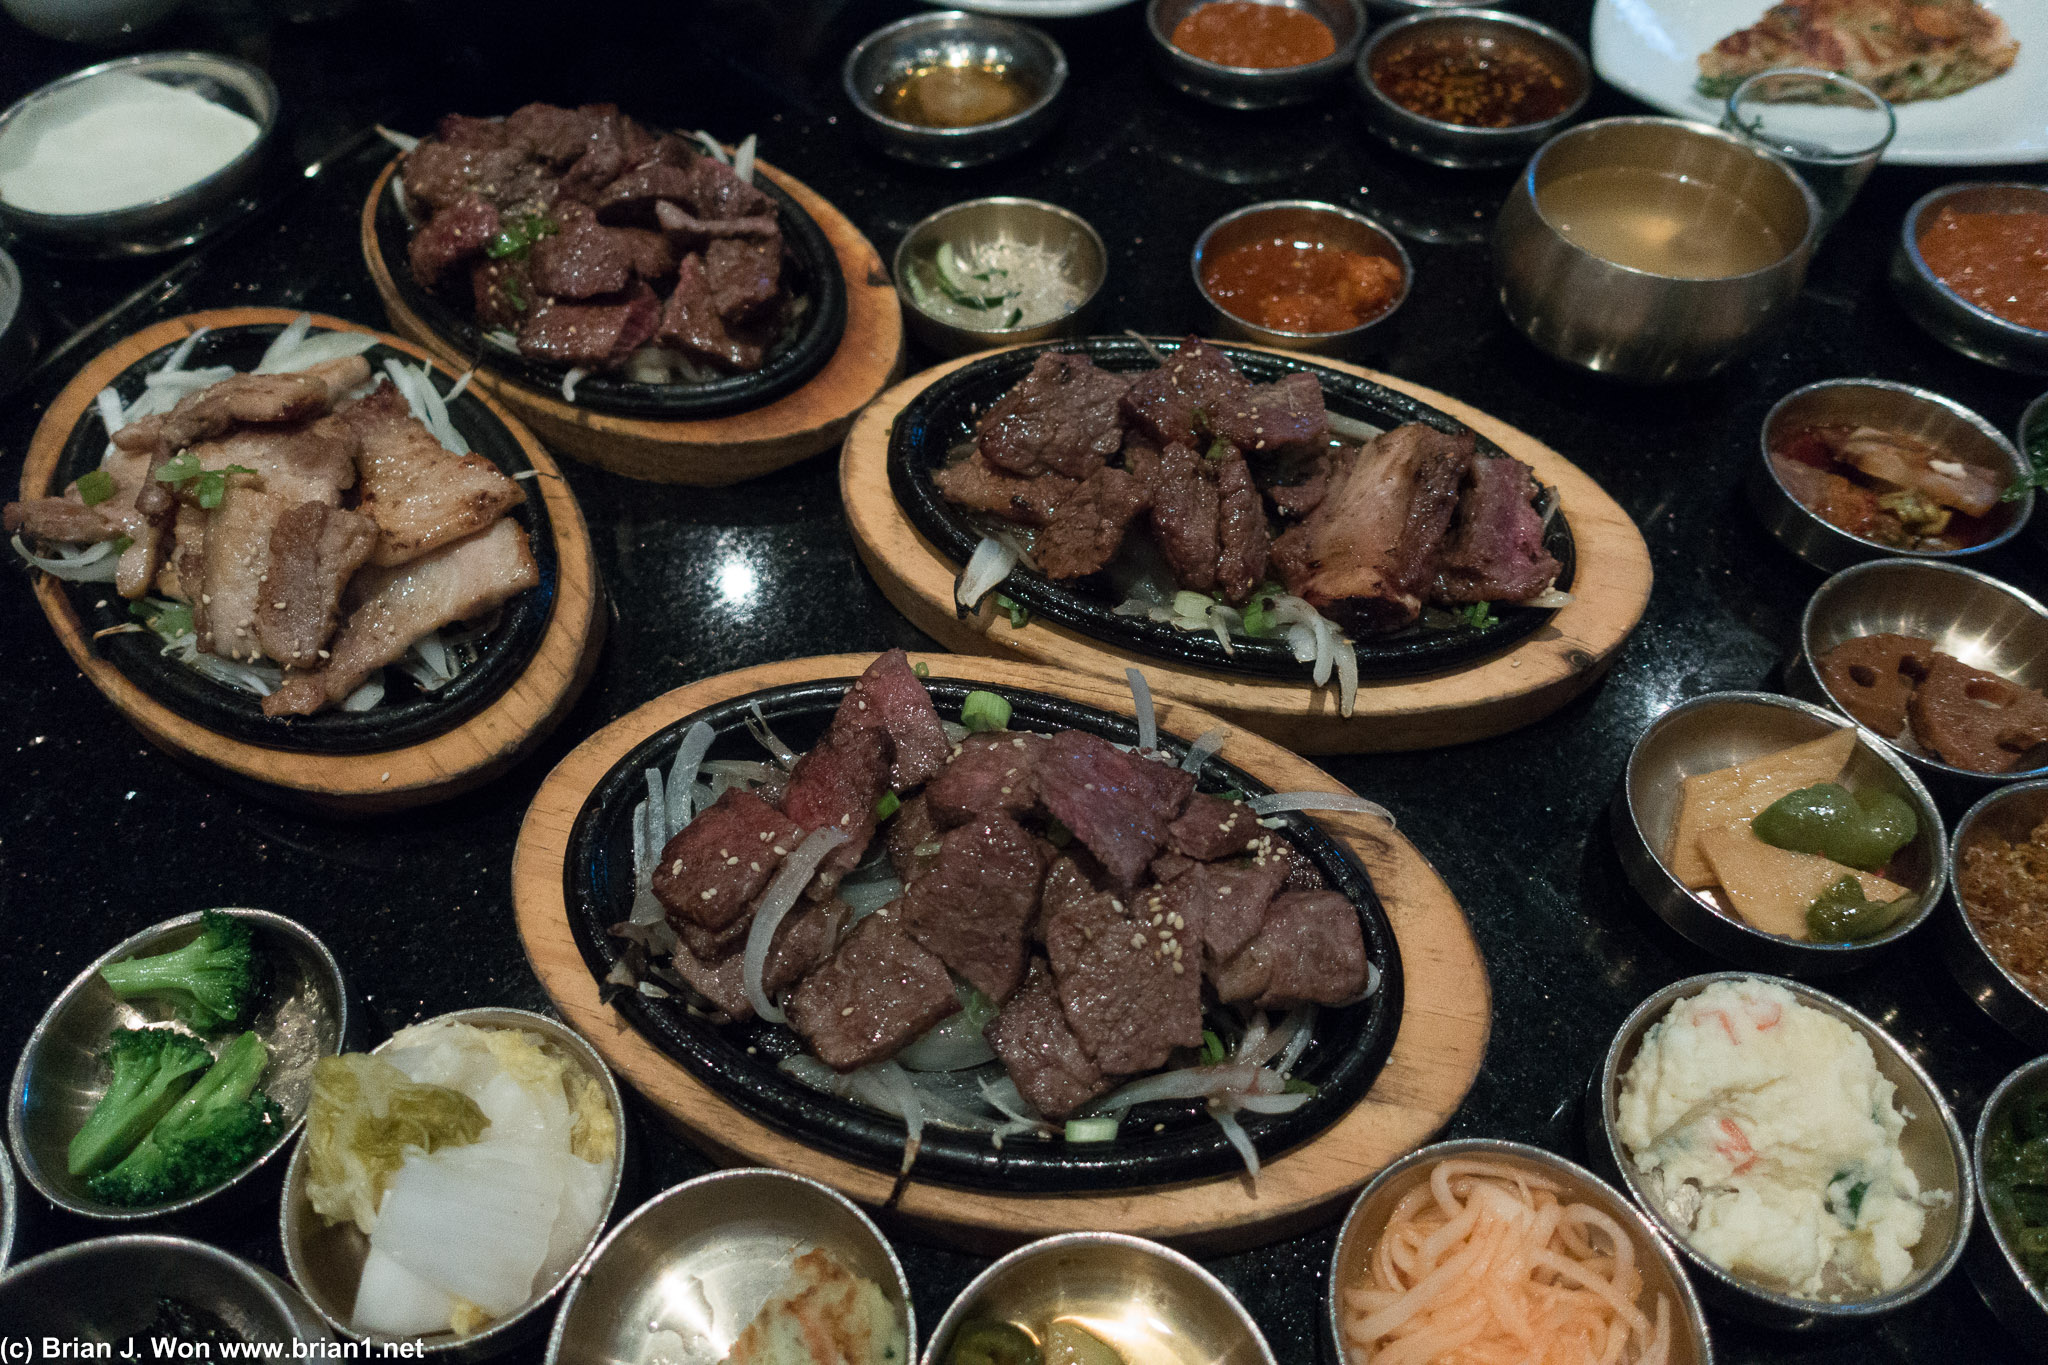 Although I think this place is much more about ban chan rather than kbbq, despite the name...